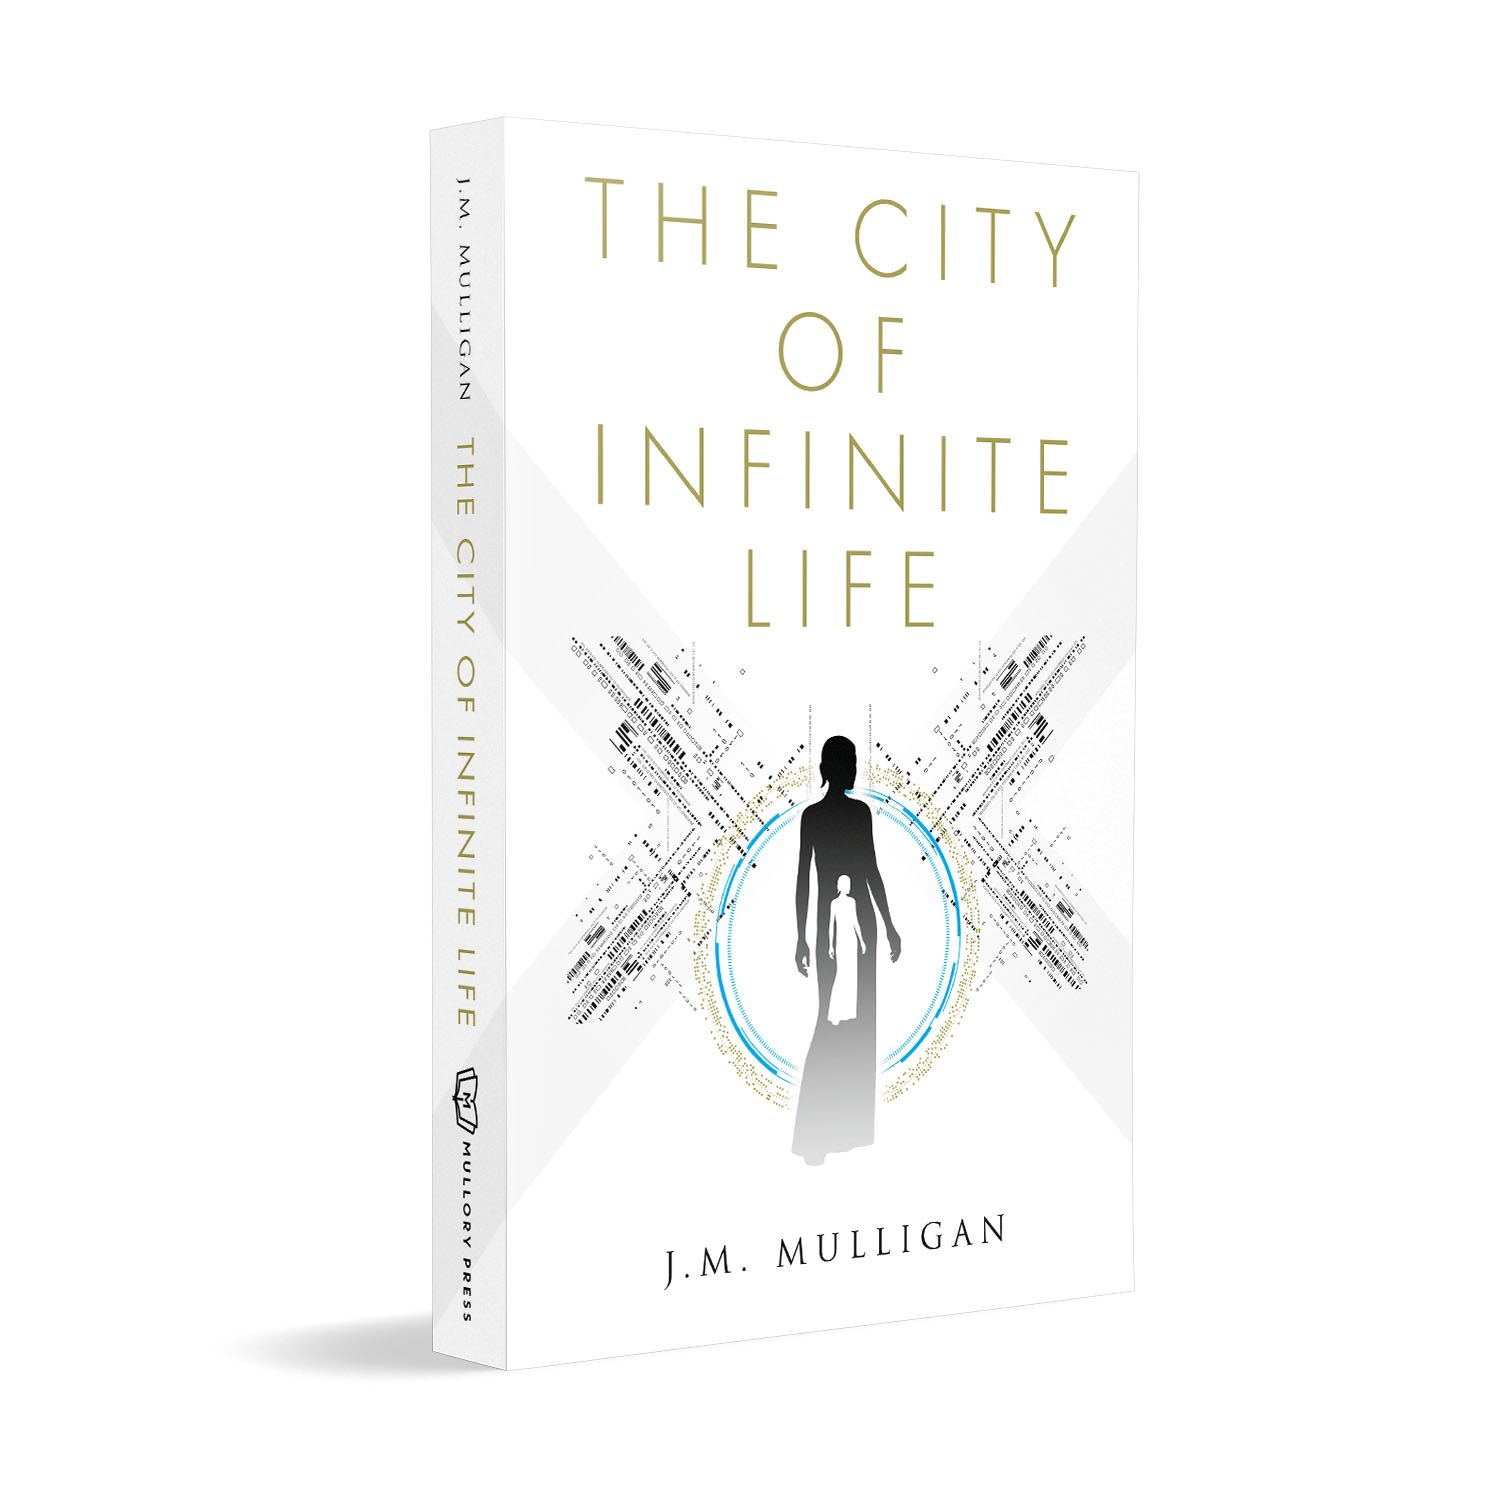 'The City Of Infinite Life' is a deep scifi, alternate reality thriller. The author is J.M. Mulligan. The book cover and interior were designed by Mark Thomas of coverness.com. To find out more about my book design services, please visit www.coverness.com